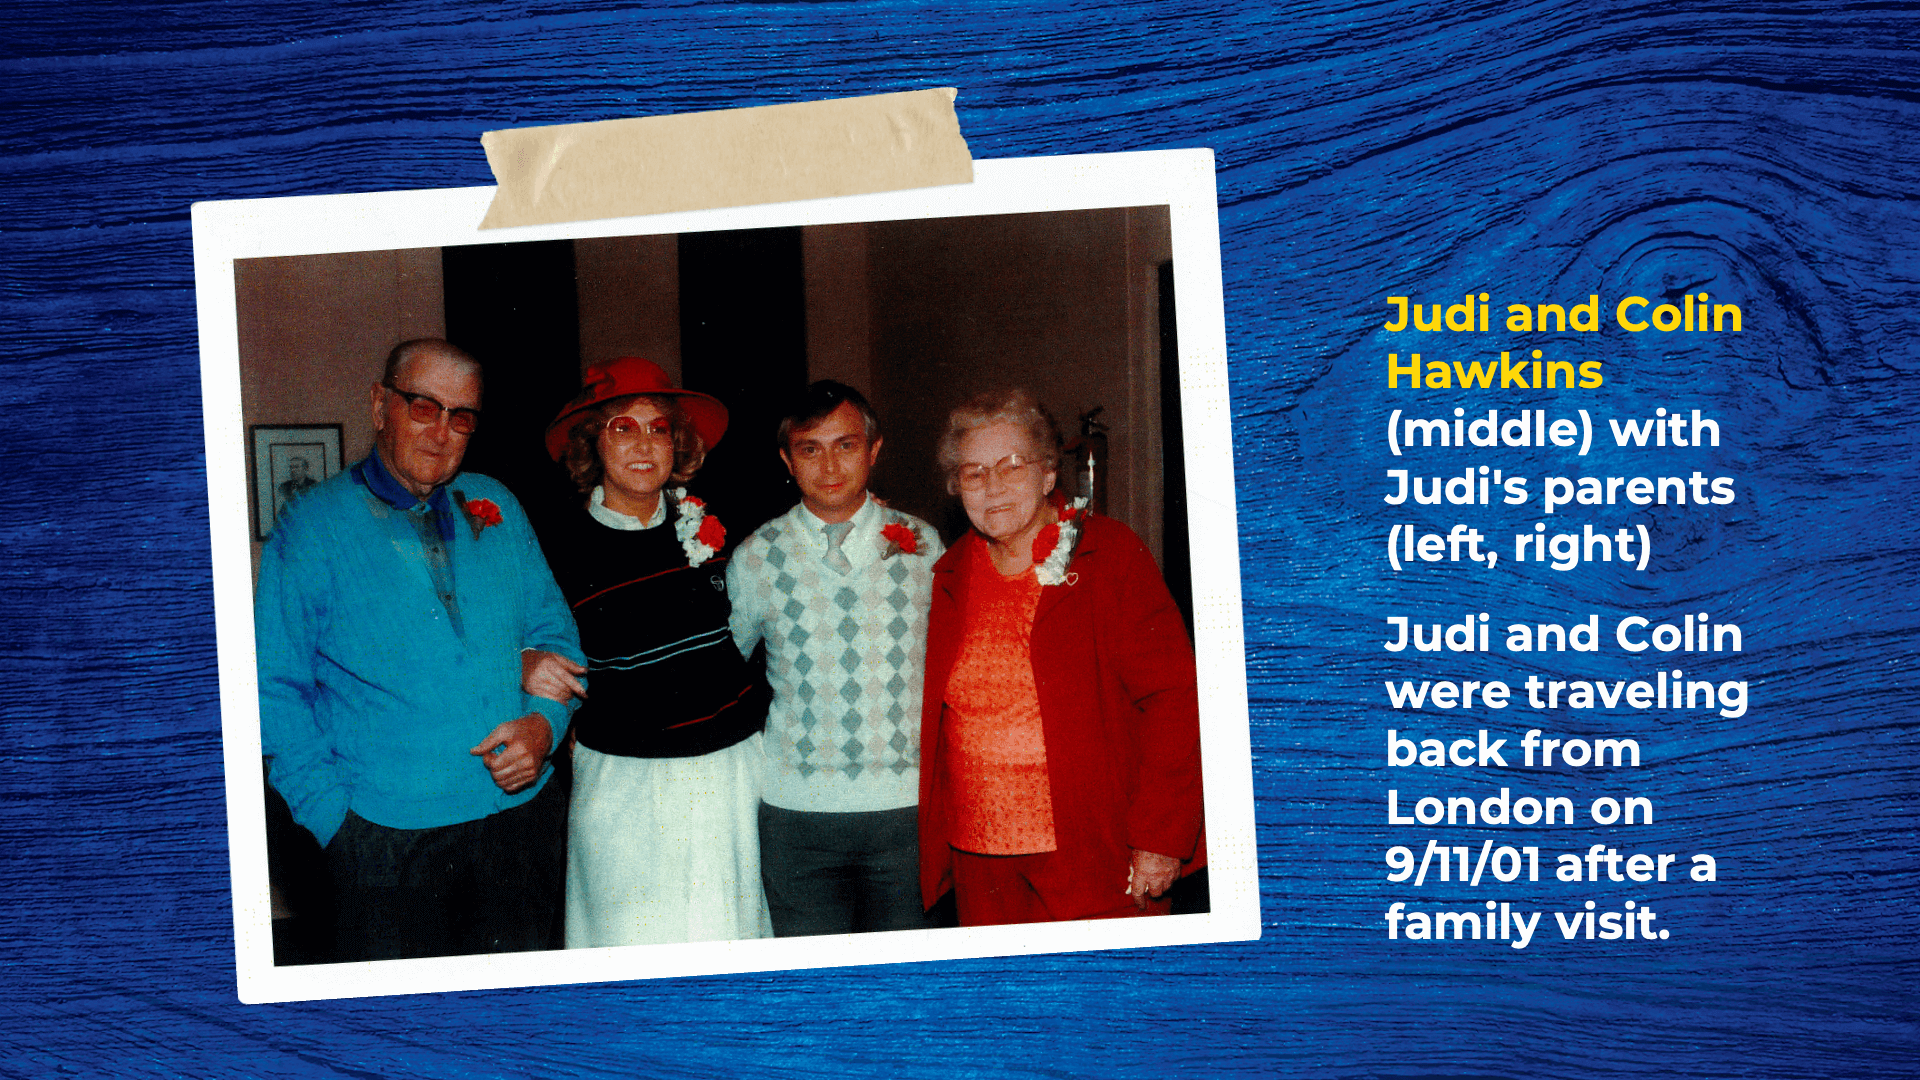 Judi and Colin Hawkins (middle) with Colin's parents (left, right). 
Judi and Colin were travelling back from London on 9/11/01 after a family visit.